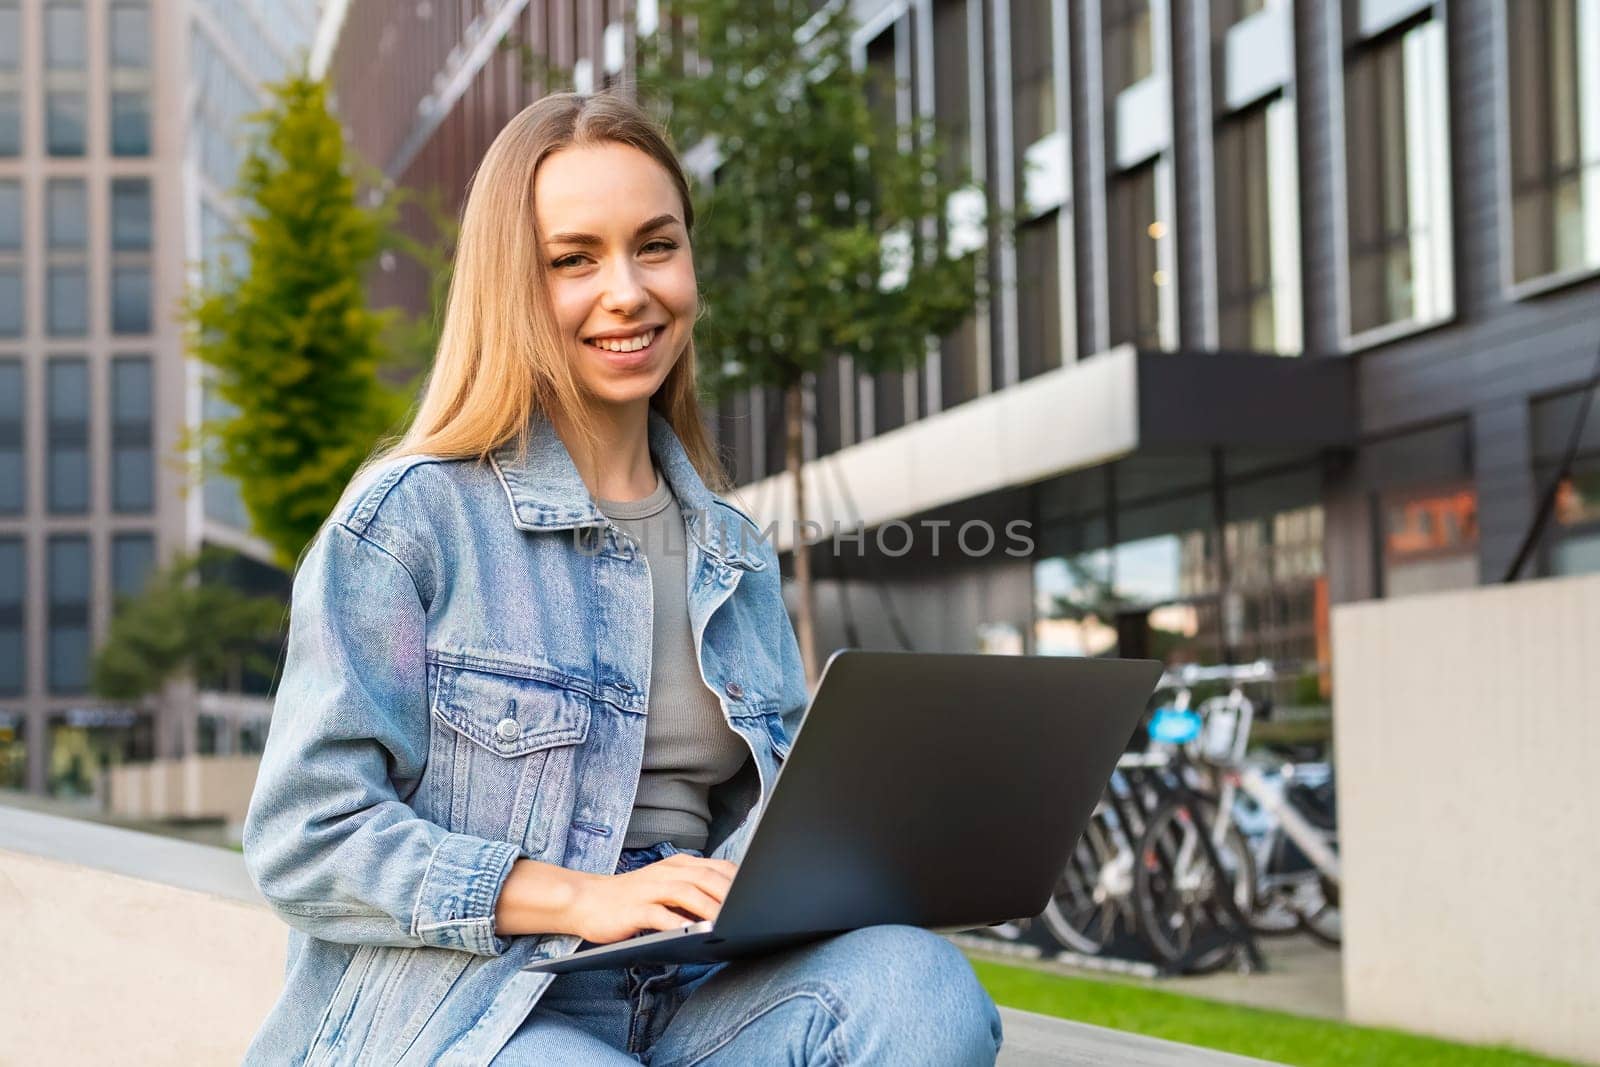 Young woman takes her freelance work to the streets, enjoying the flexibility and urban atmosphere.